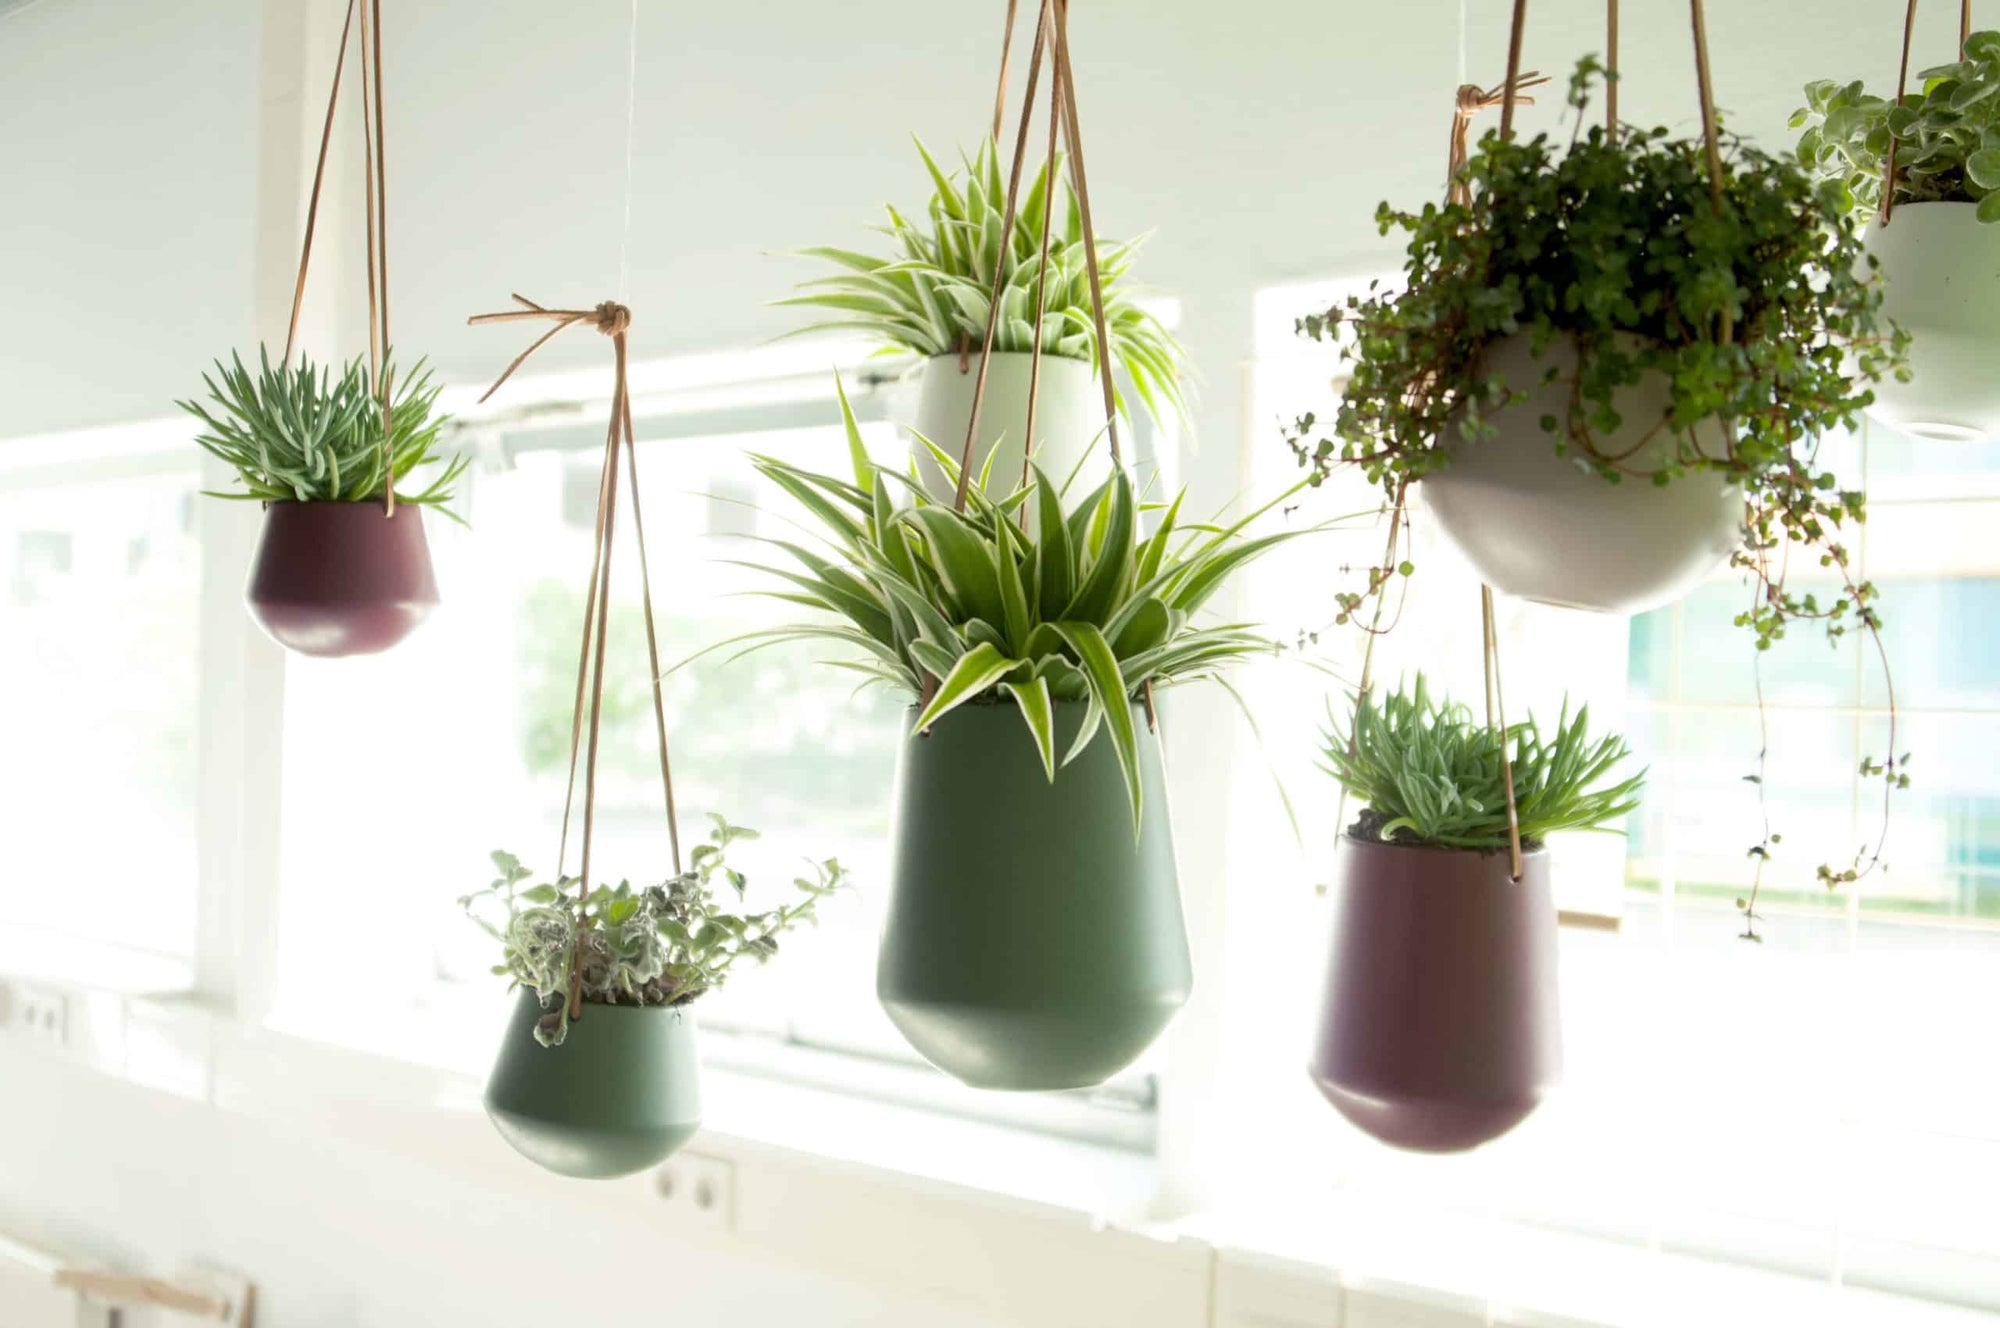 Society - Add a little greenery to your world indoors